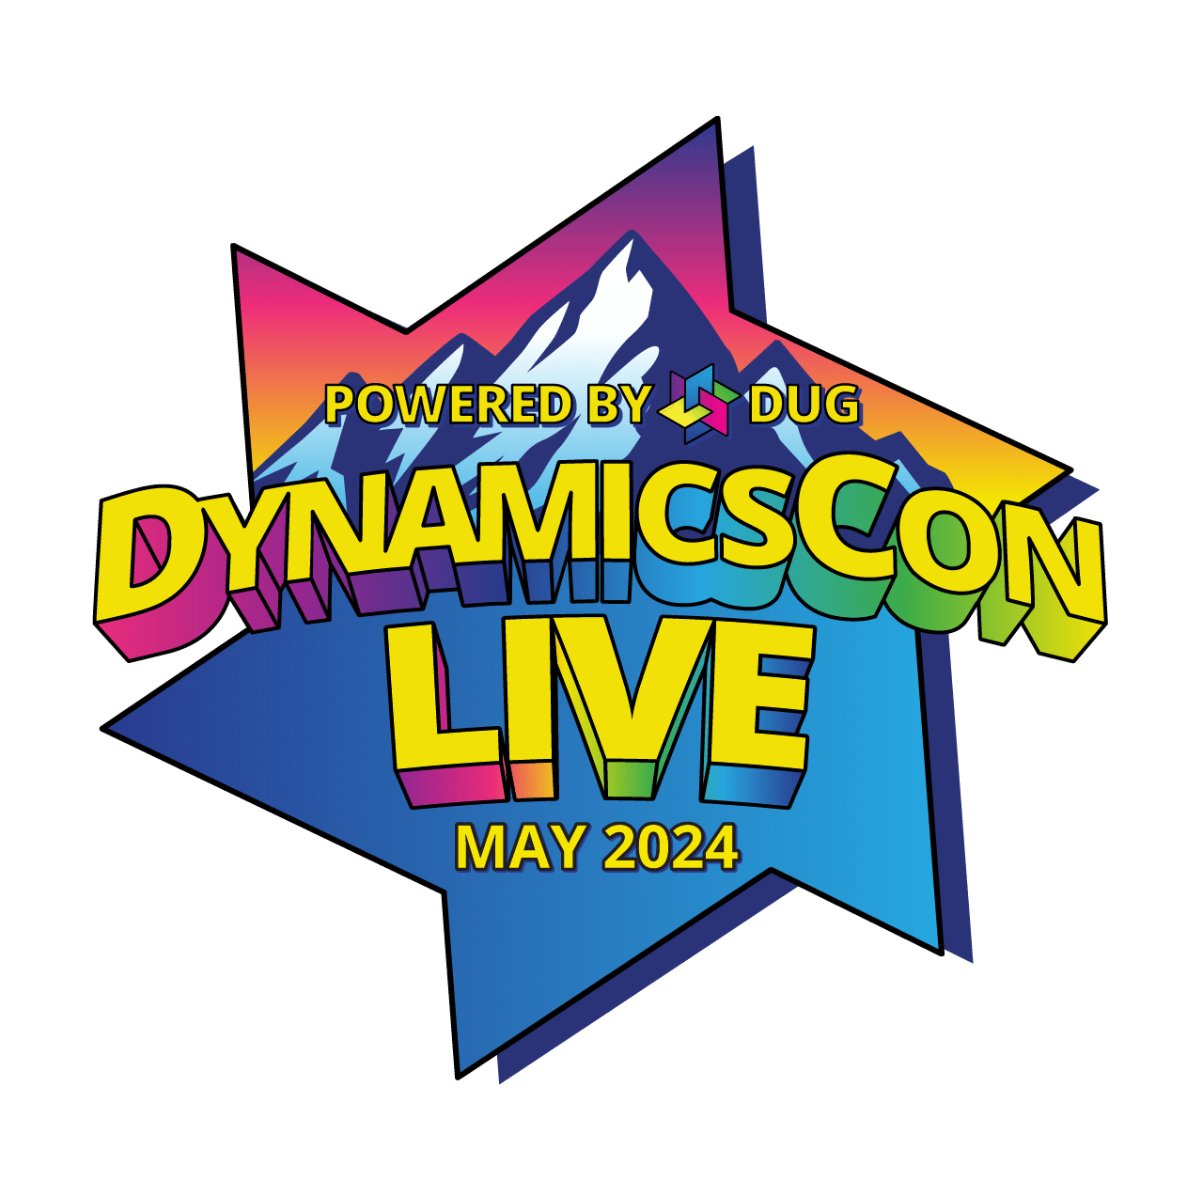 The Cincom CPQ team will be at DynamicsCon LIVE in Denver, CO, May 13-16, 2024. Ready to talk all things Microsoft Dynamics 365 and how a CPQ solution can benefit your business. Schedule time to meet with us today! bit.ly/3Tq5chr #DynamicsConLIVE #DUG #Dynamics365